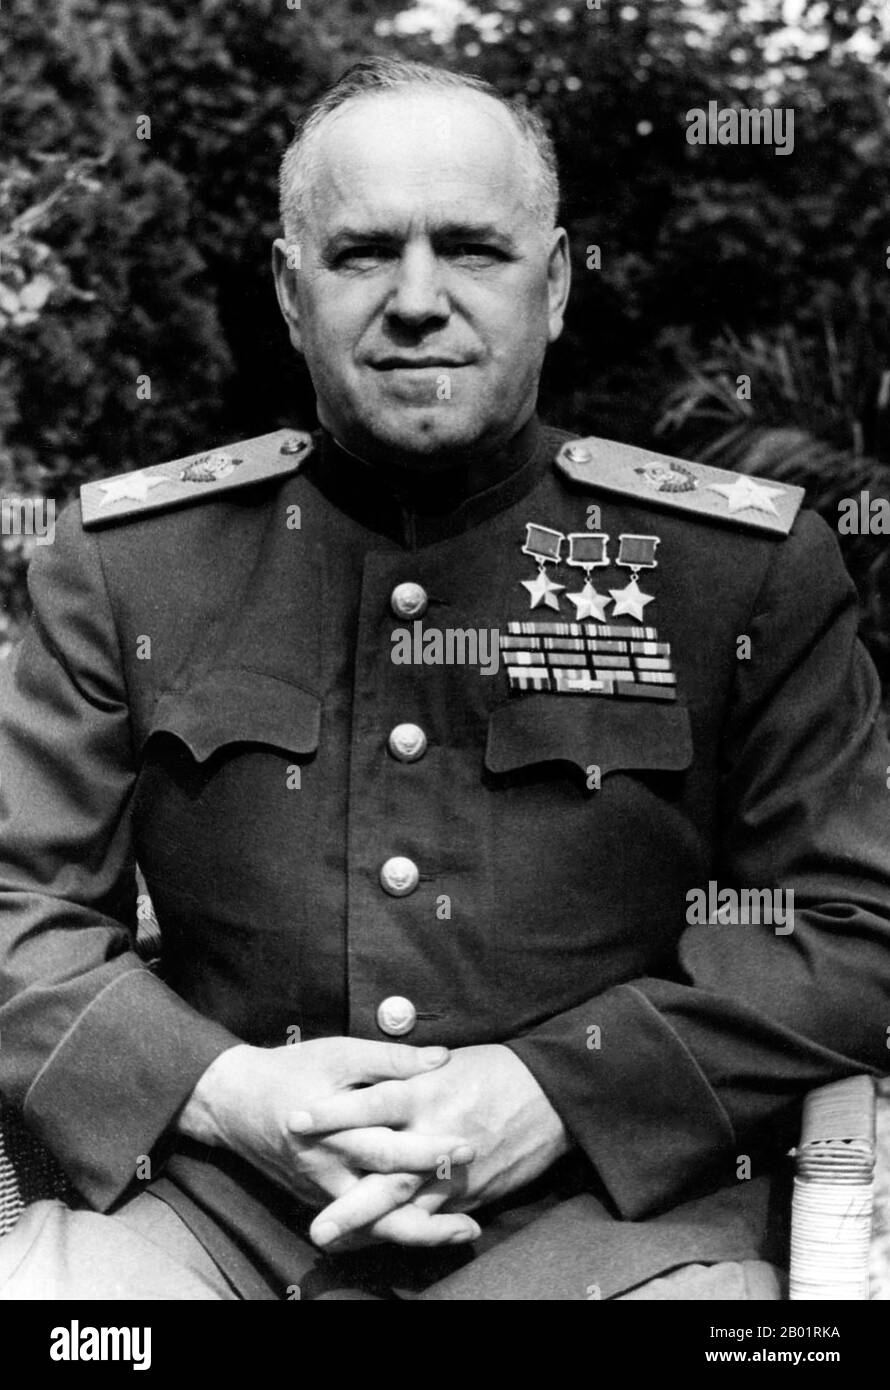 Marshal of the Soviet Union Georgy Konstantinovich Zhukov (Russian: Гео́ргий Константи́нович Жу́ков; 1896 – 18 June 1974), was a Russian career officer in the Red Army who, in the course of World War II, played a pivotal role in leading the Red Army through much of Eastern Europe to liberate the Soviet Union and other nations from the Axis Powers' occupation and conquer Germany's capital, Berlin. He is the most decorated general in the history of Russia and the Soviet Union.  In 1938 Zhukov was directed to command the First Soviet Mongolian Army Group, and saw action against Japan's Kwantung A Stock Photo